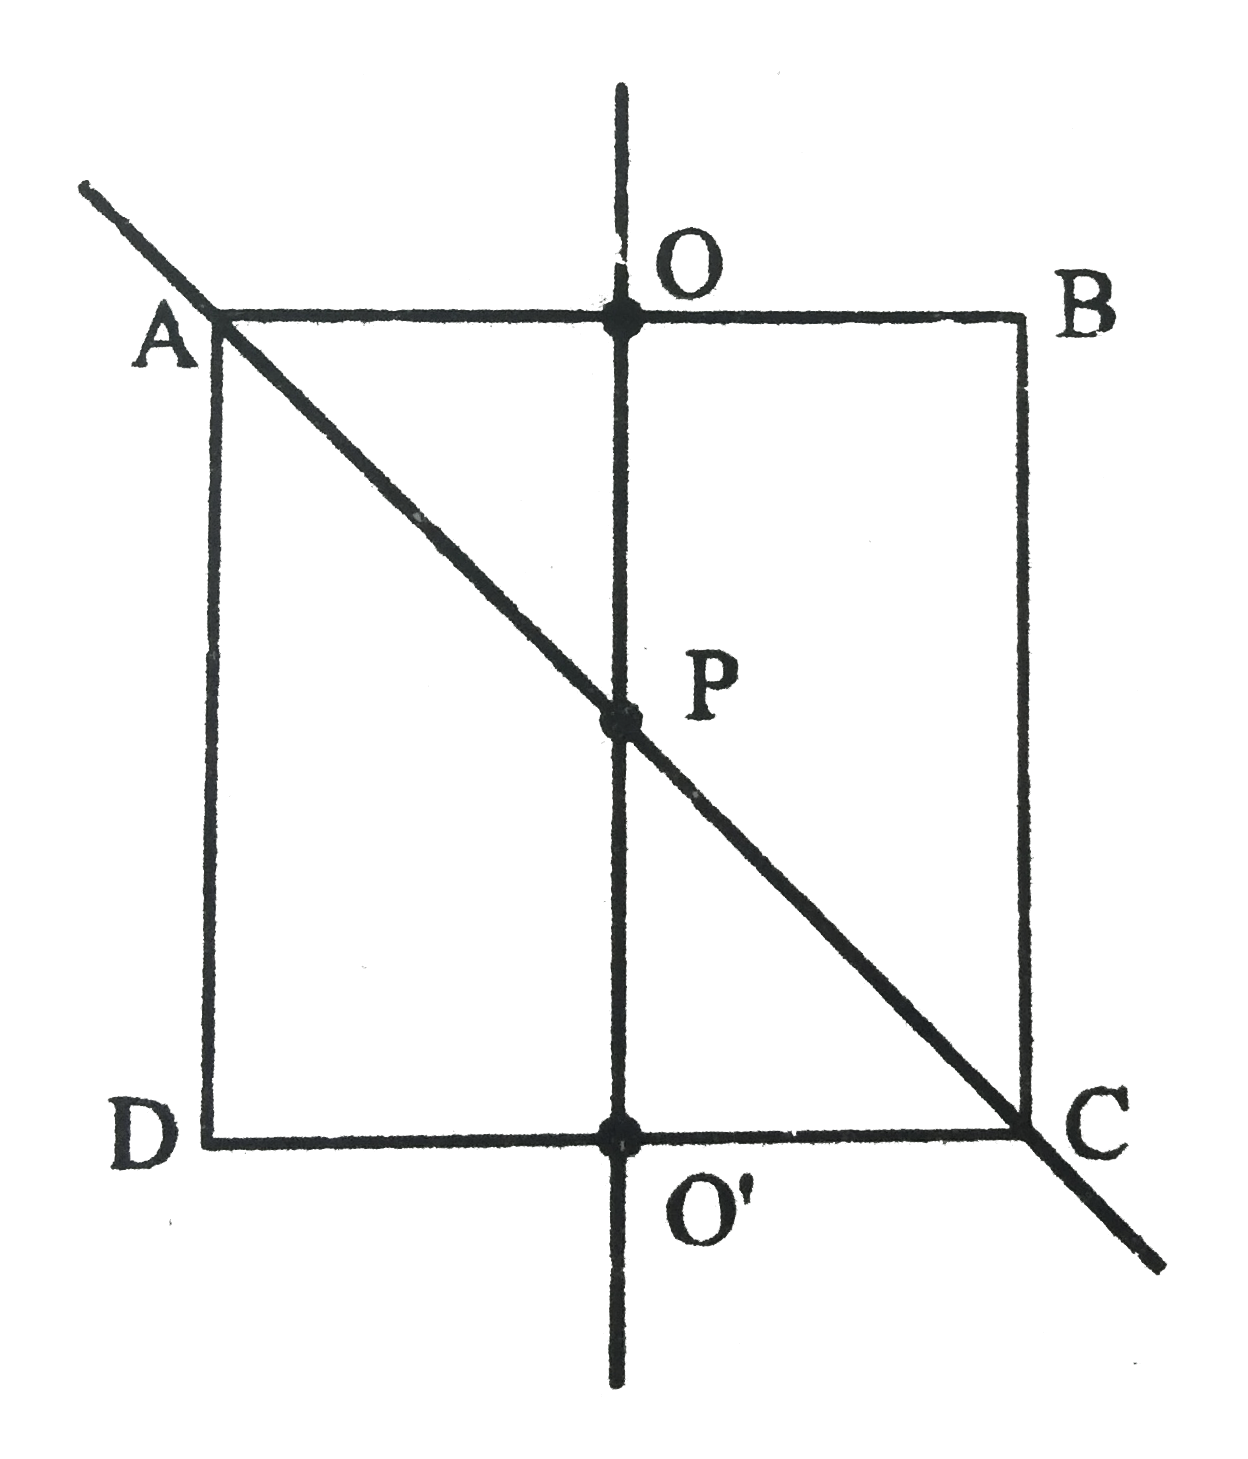 Let I(1) and I(2) be the moment of inertia of a uniform square plate about axes APC and OPO respectively as shown in the figure.P is centre of square. The ratio (I(1))/(I(2)) moment of inertia is -   .